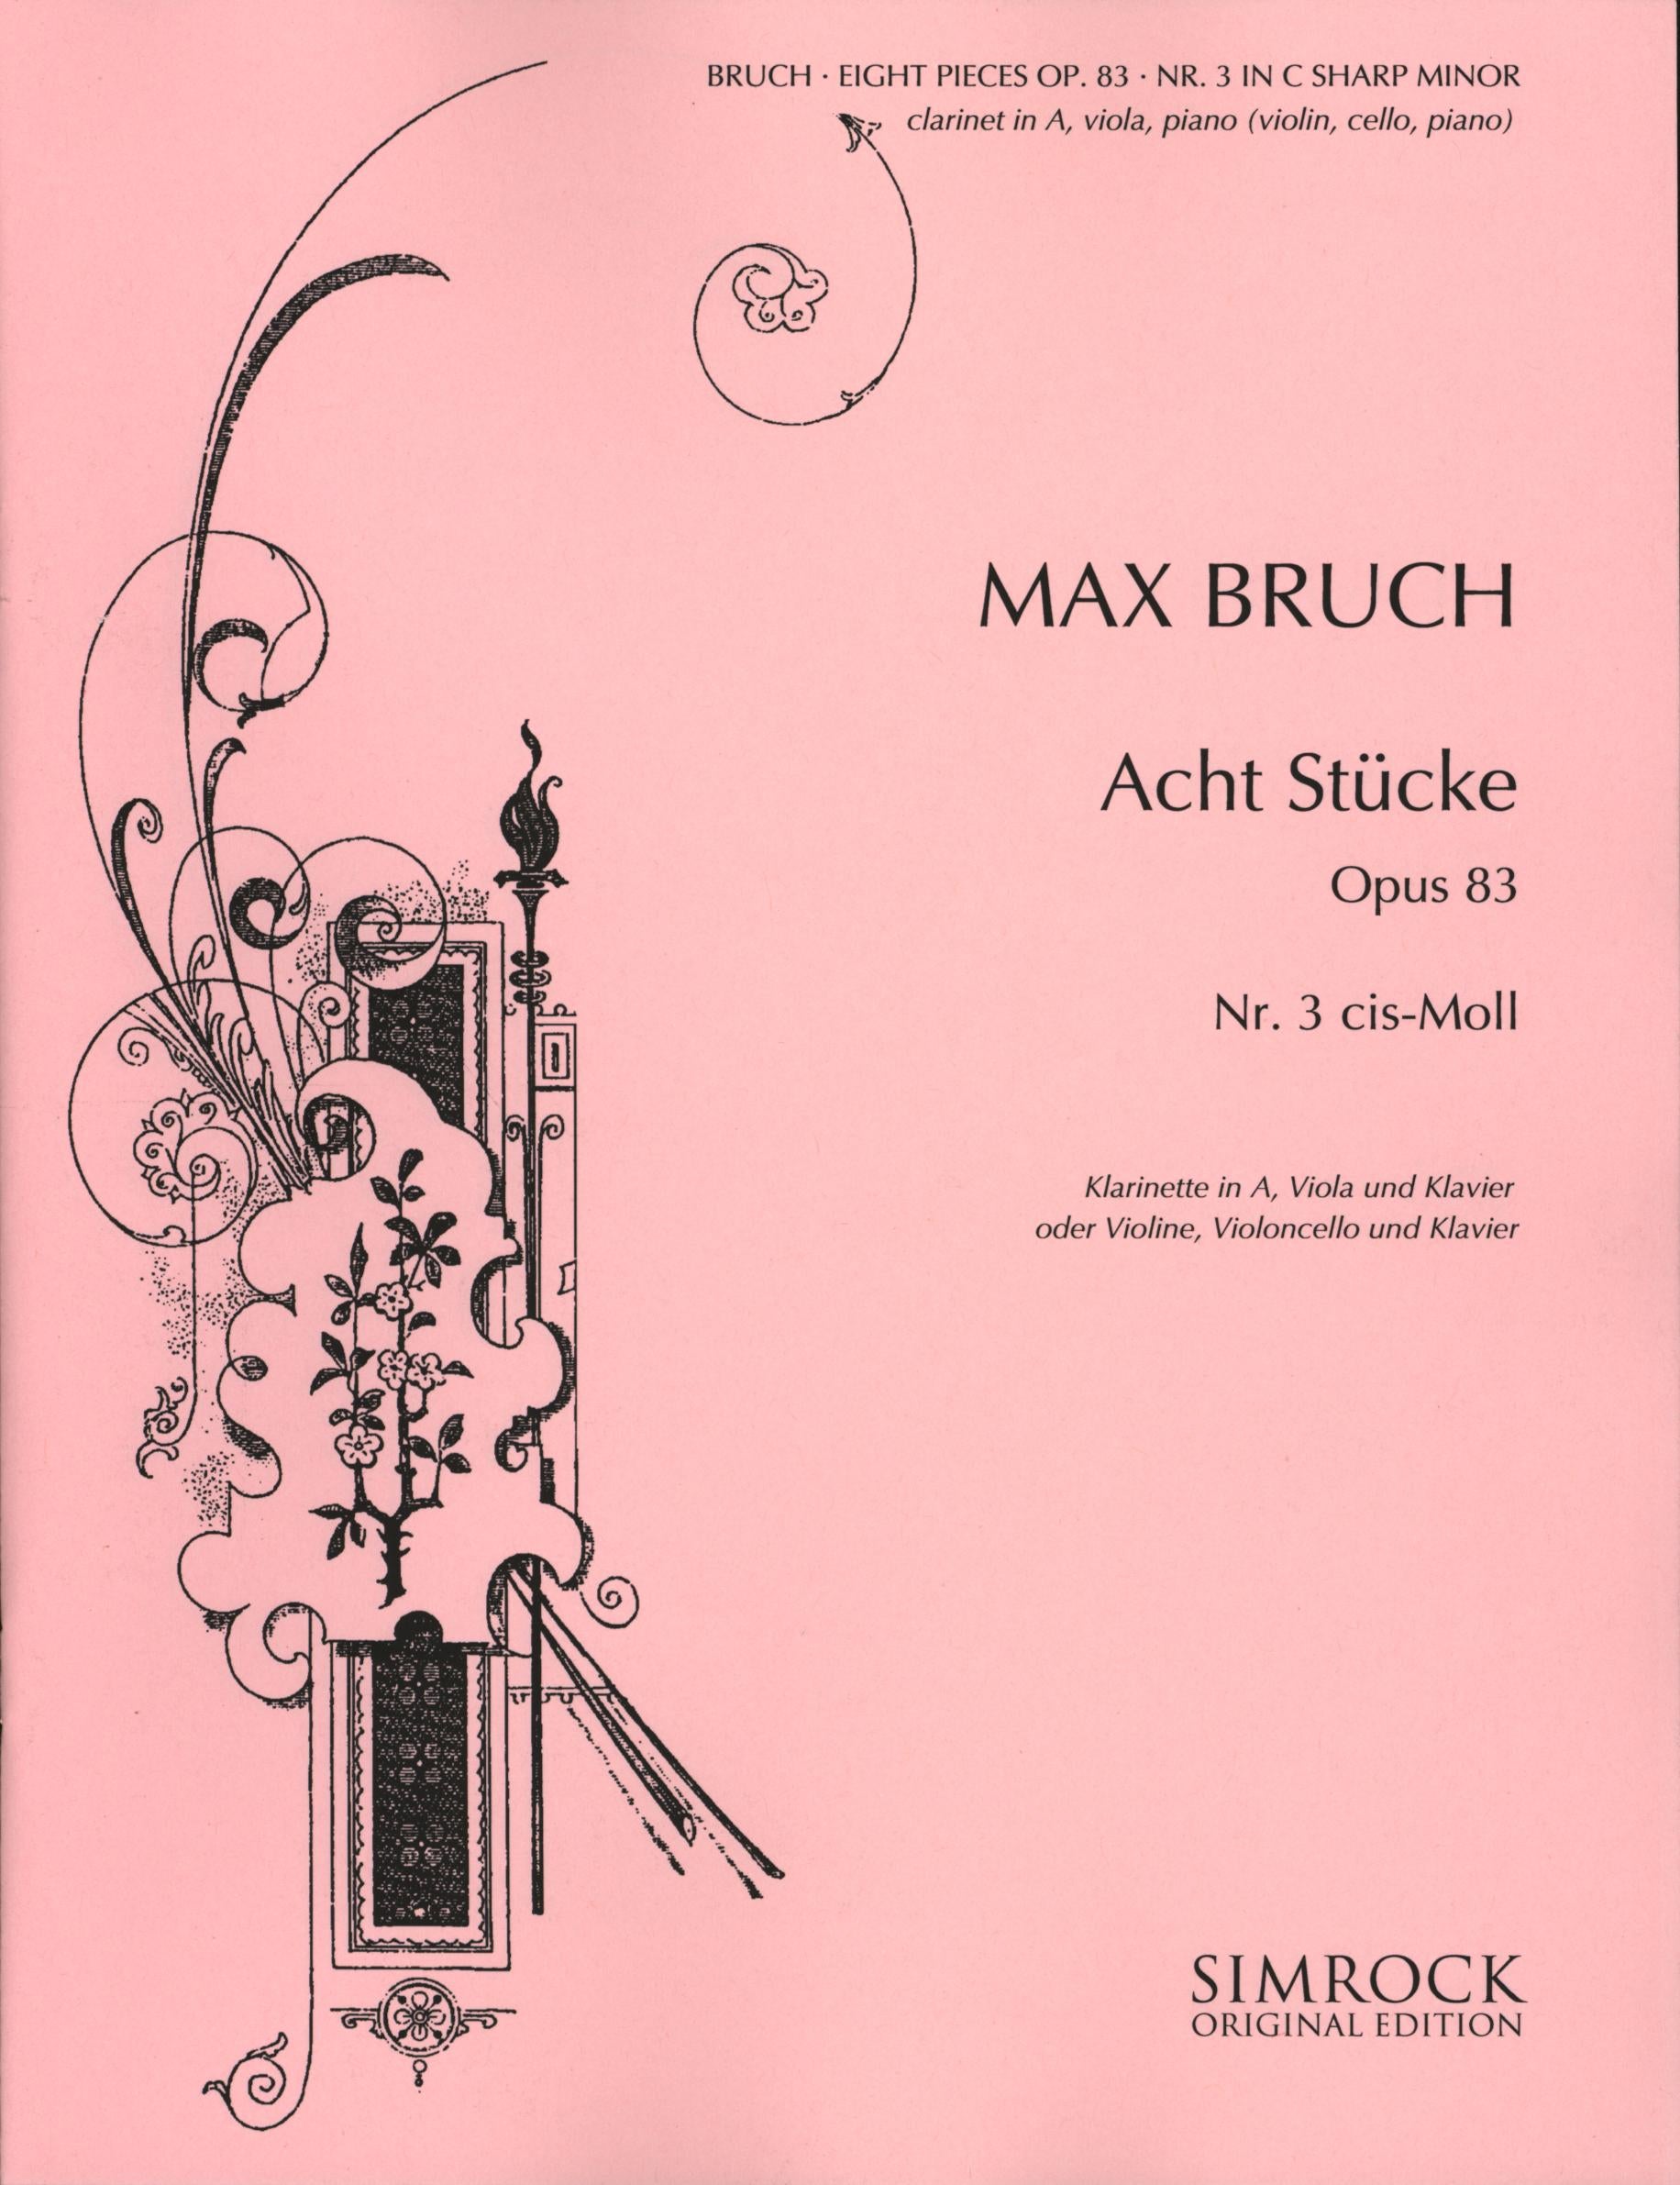 Bruch: Eight Pieces, Op. 83, No. 3